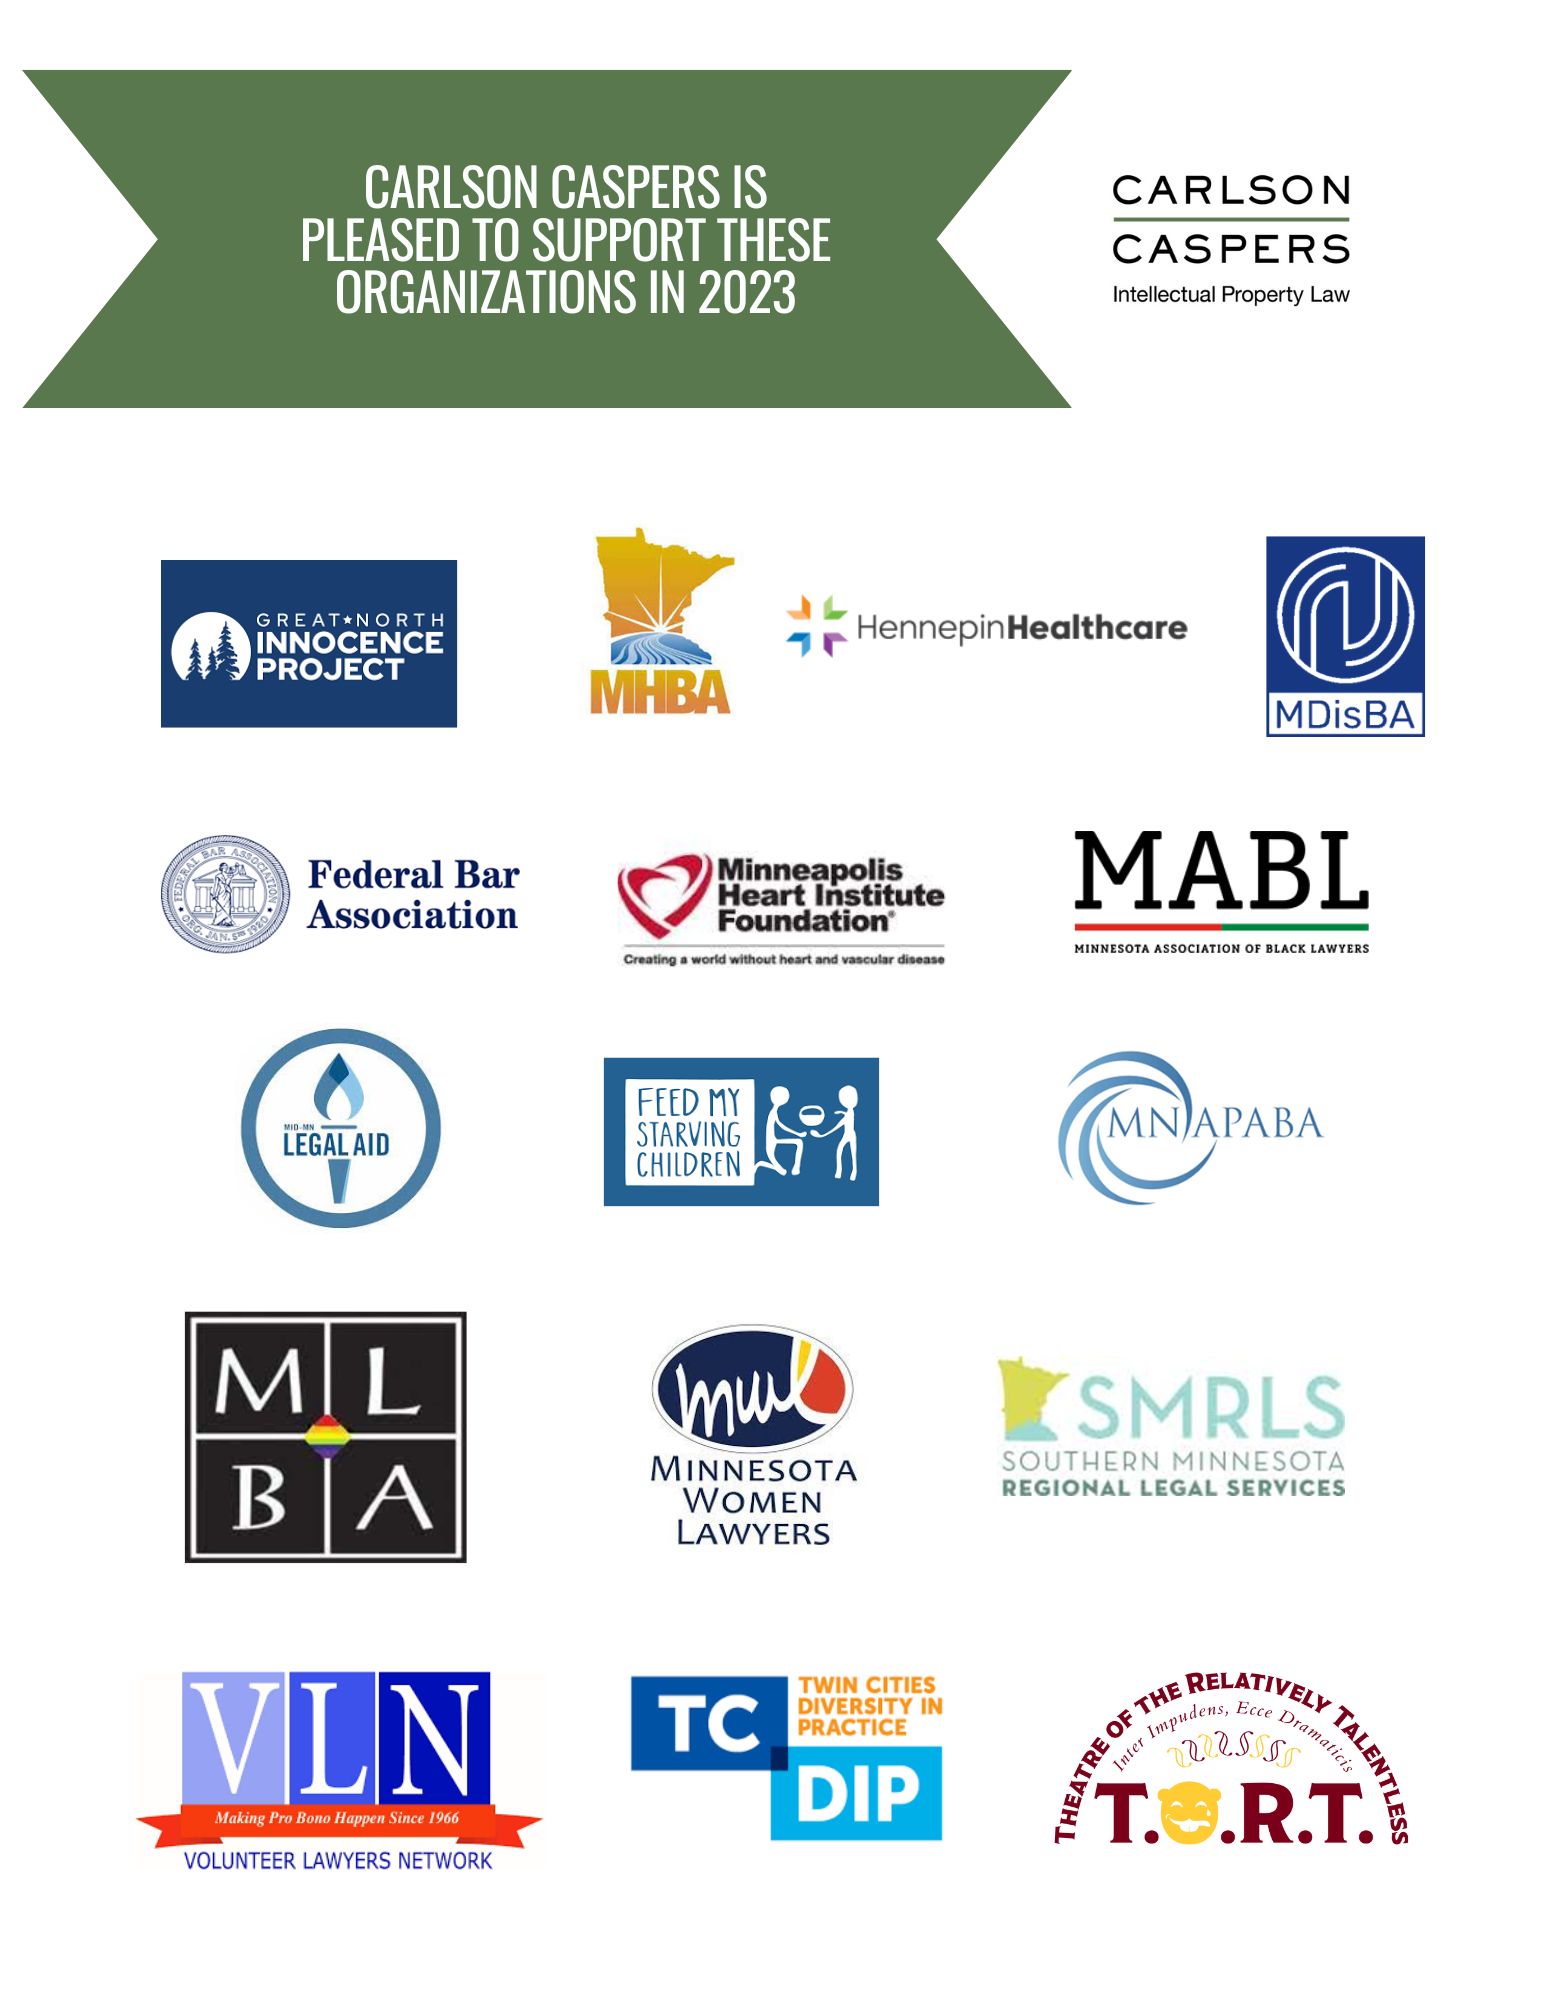 Carlson Caspers is Pleased to Support these Organizations in 2023 - Carlson Caspers